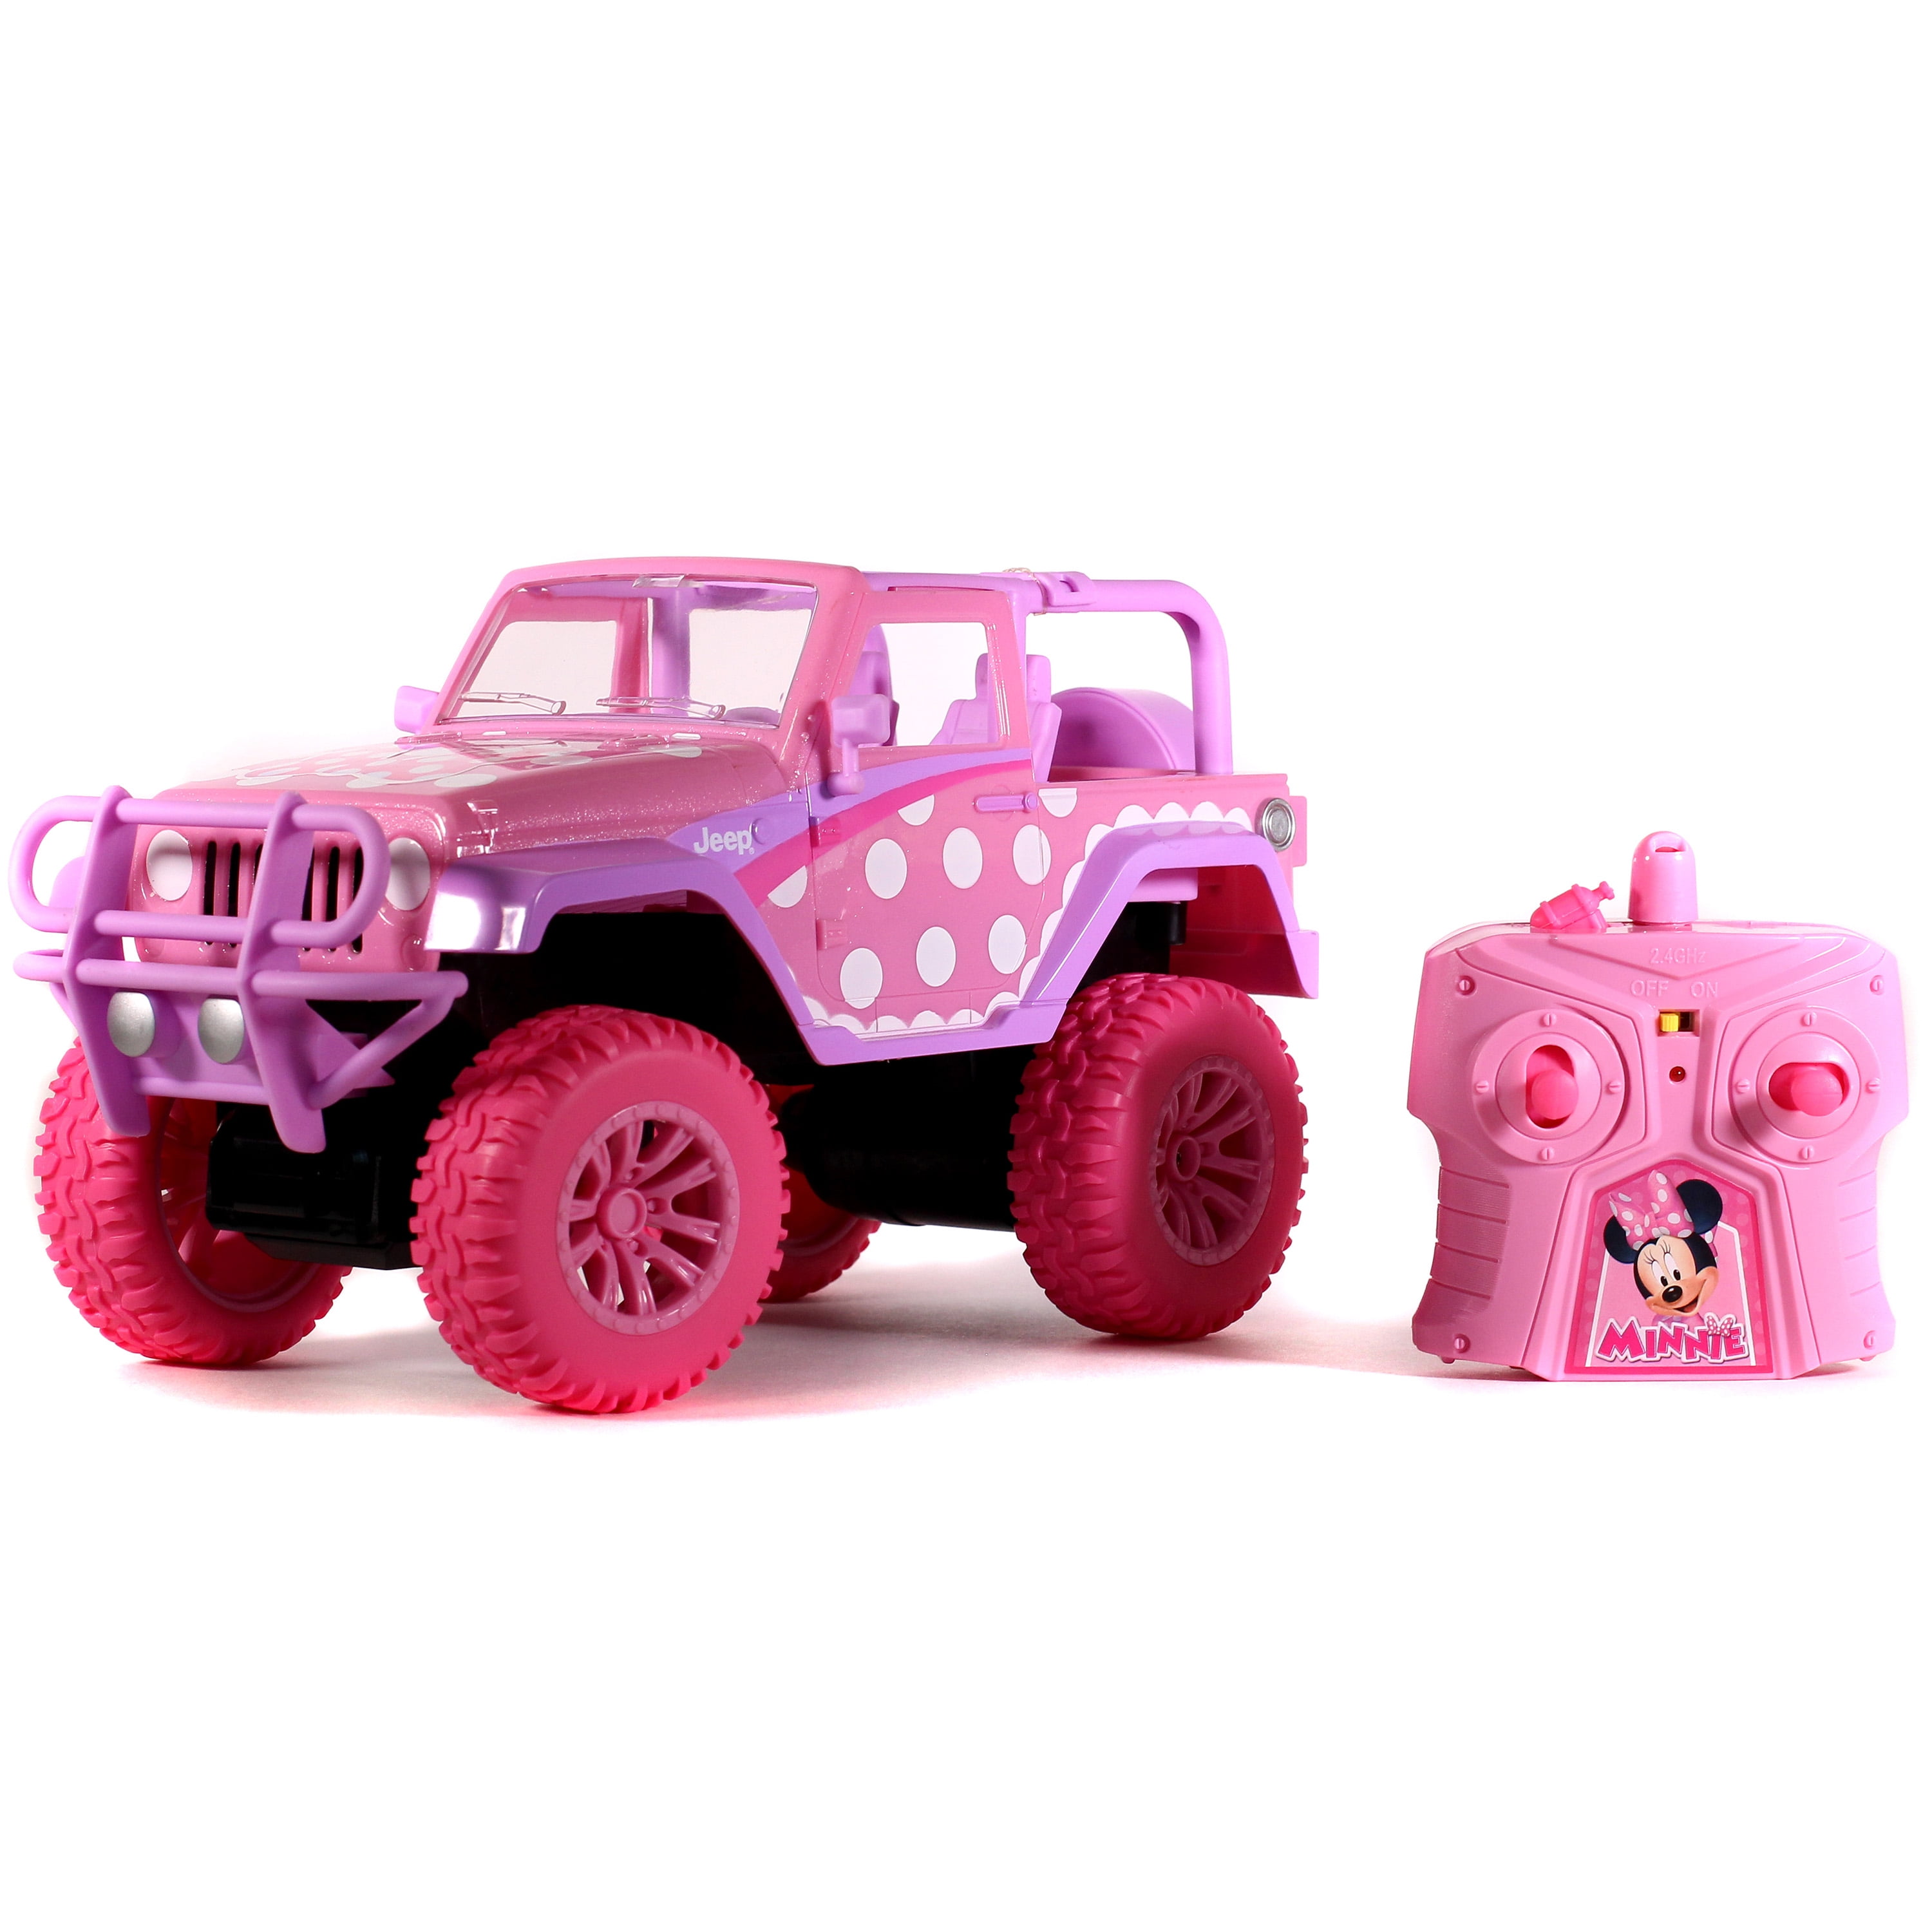 Big Foot Jeep R/C Vehicle 1:16 Scale Pink for sale online 96991 Jada Toys GIRLMAZING 